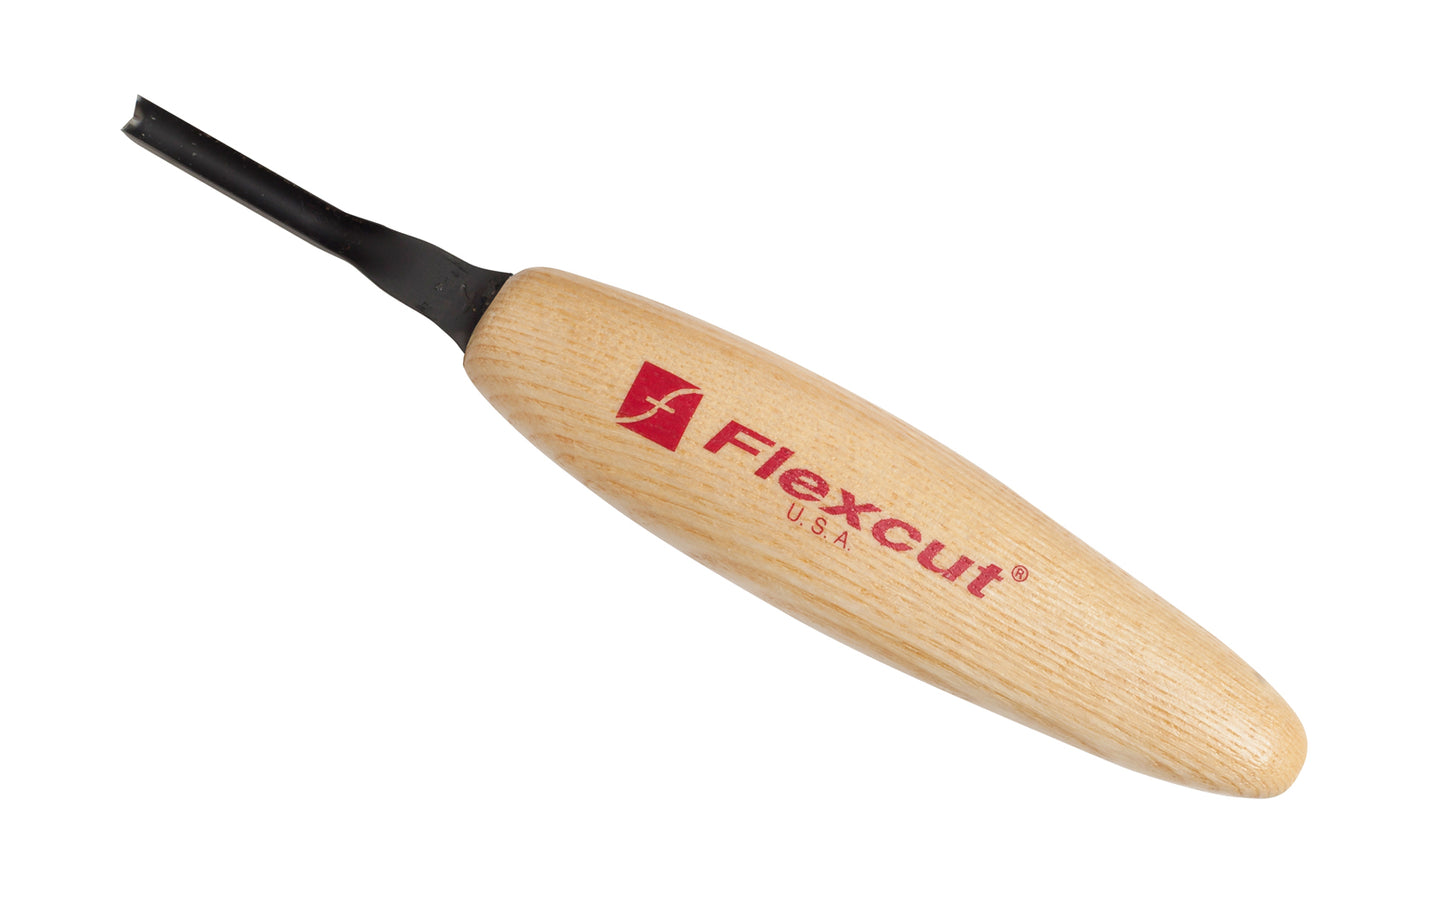 The Flexcut Micro Deep U-Gouge - 3 mm ~ Model MT29 can handle the extra-fine details in woodcarving. Great for carving details & adding texture such as hair, etc. Made in USA ~ 651646300292